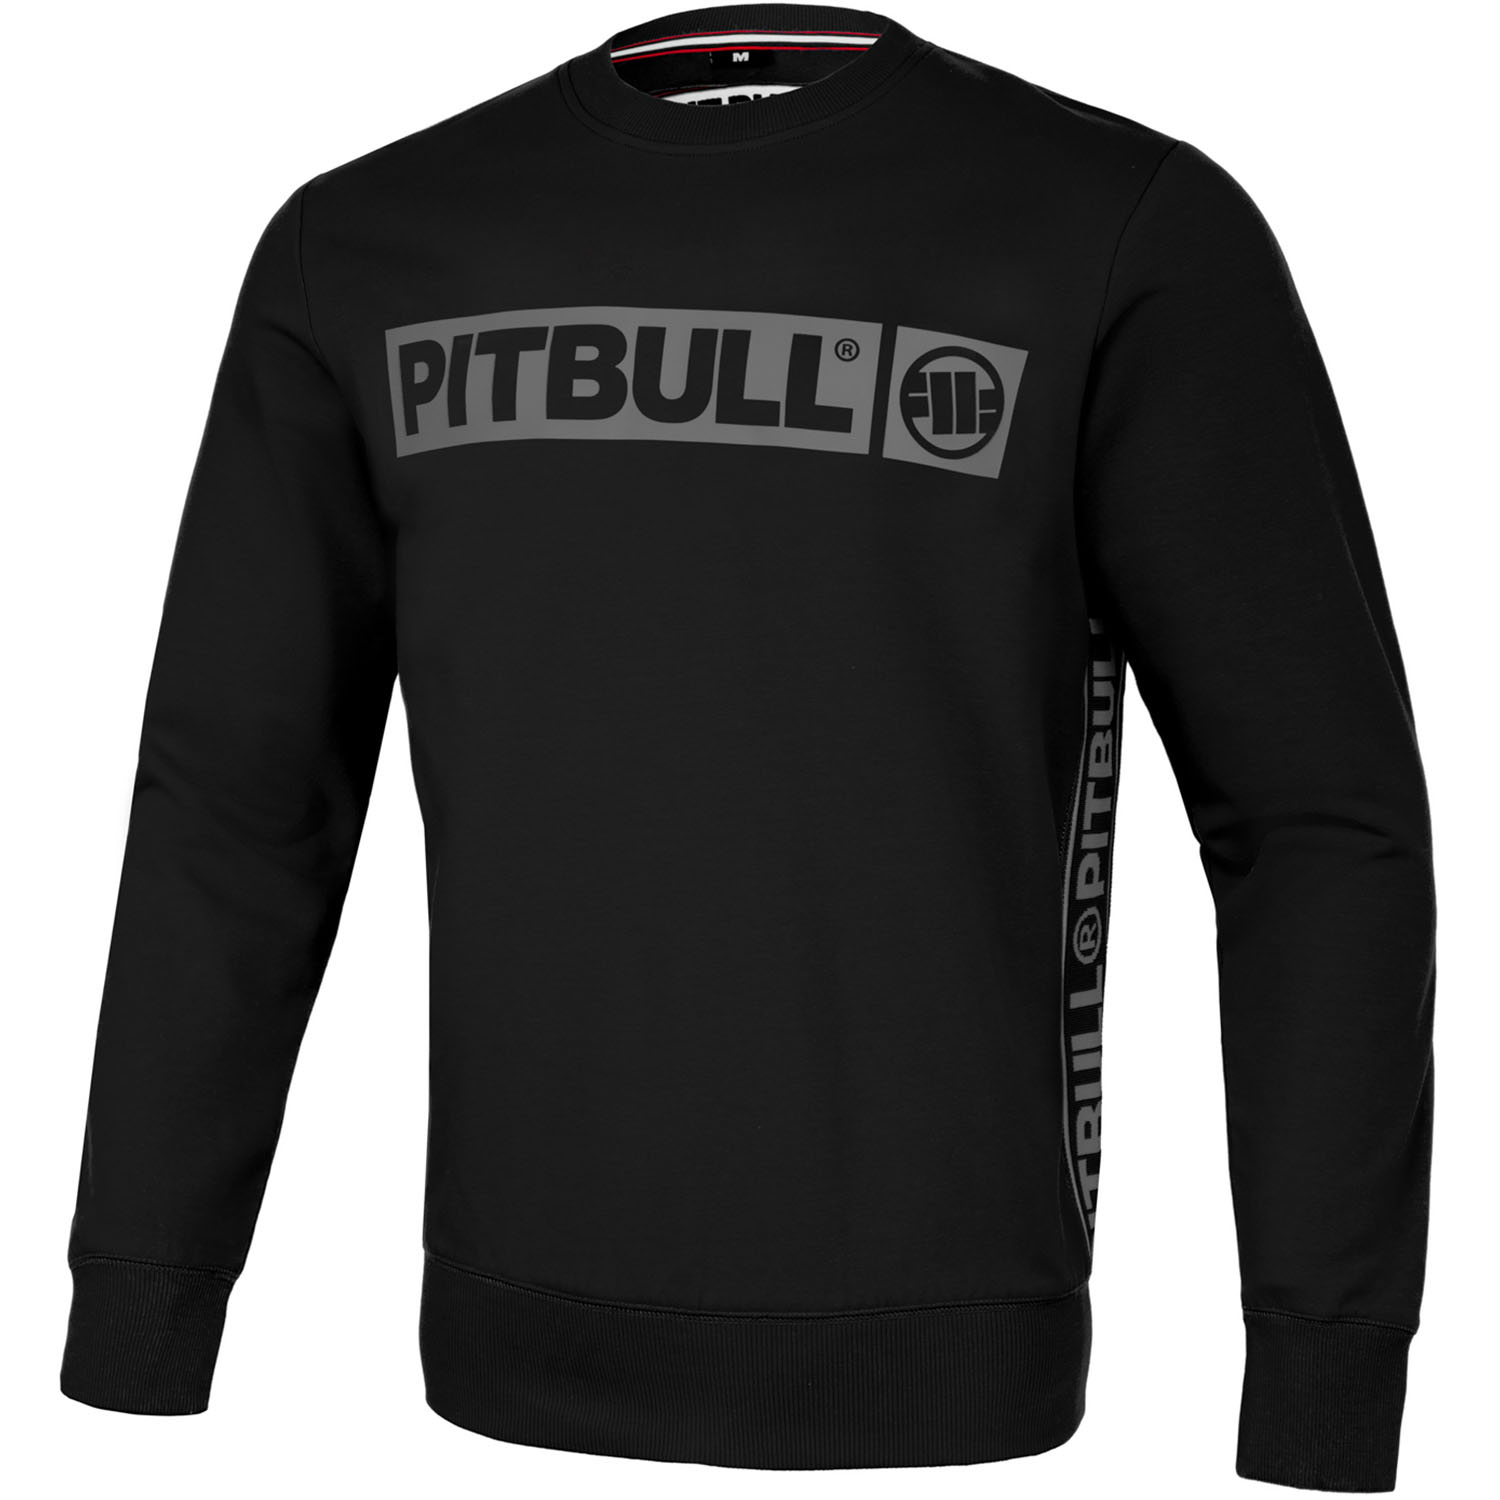 Pit Bull West Coast Pullover, Albion, black, XL